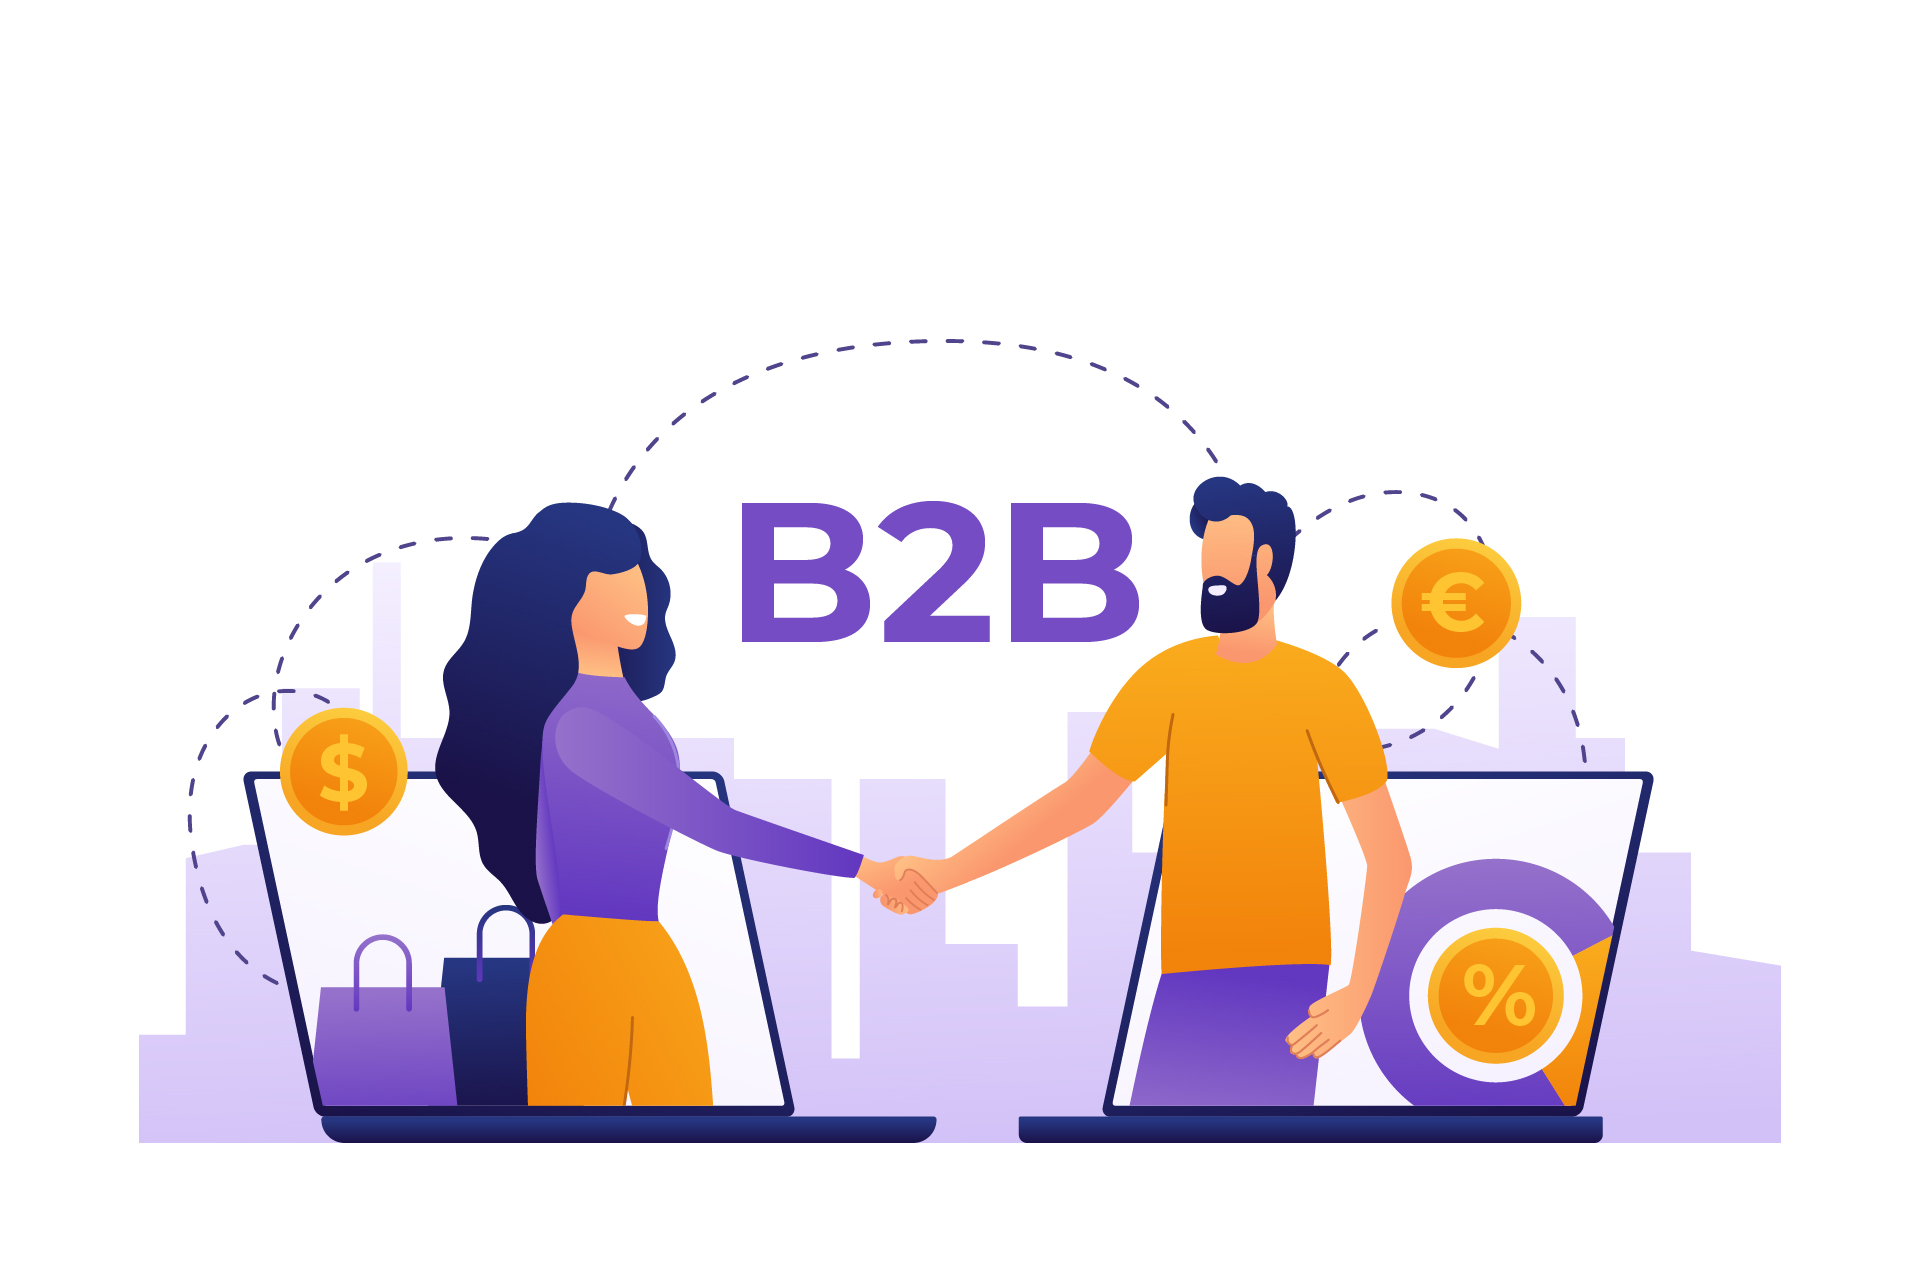 What are the key features of B2B eCommerce platforms